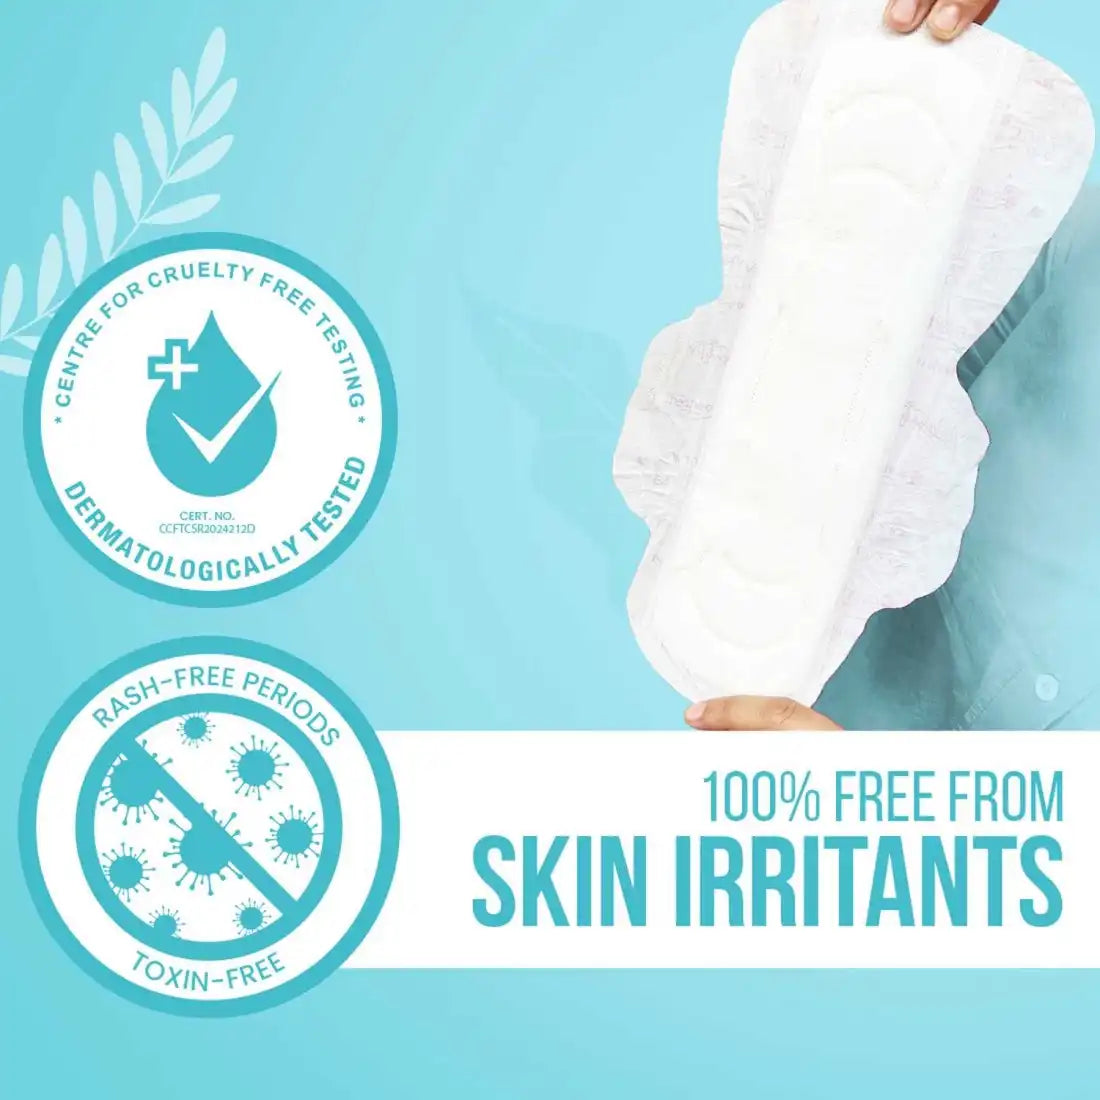 everteen XXL Sanitary Pads with Double Flaps are Dermatologically Tested and Free from Skin irritants To Give You Rash-Free Periods - 40 Pads, 320mm - everteen-neud.com